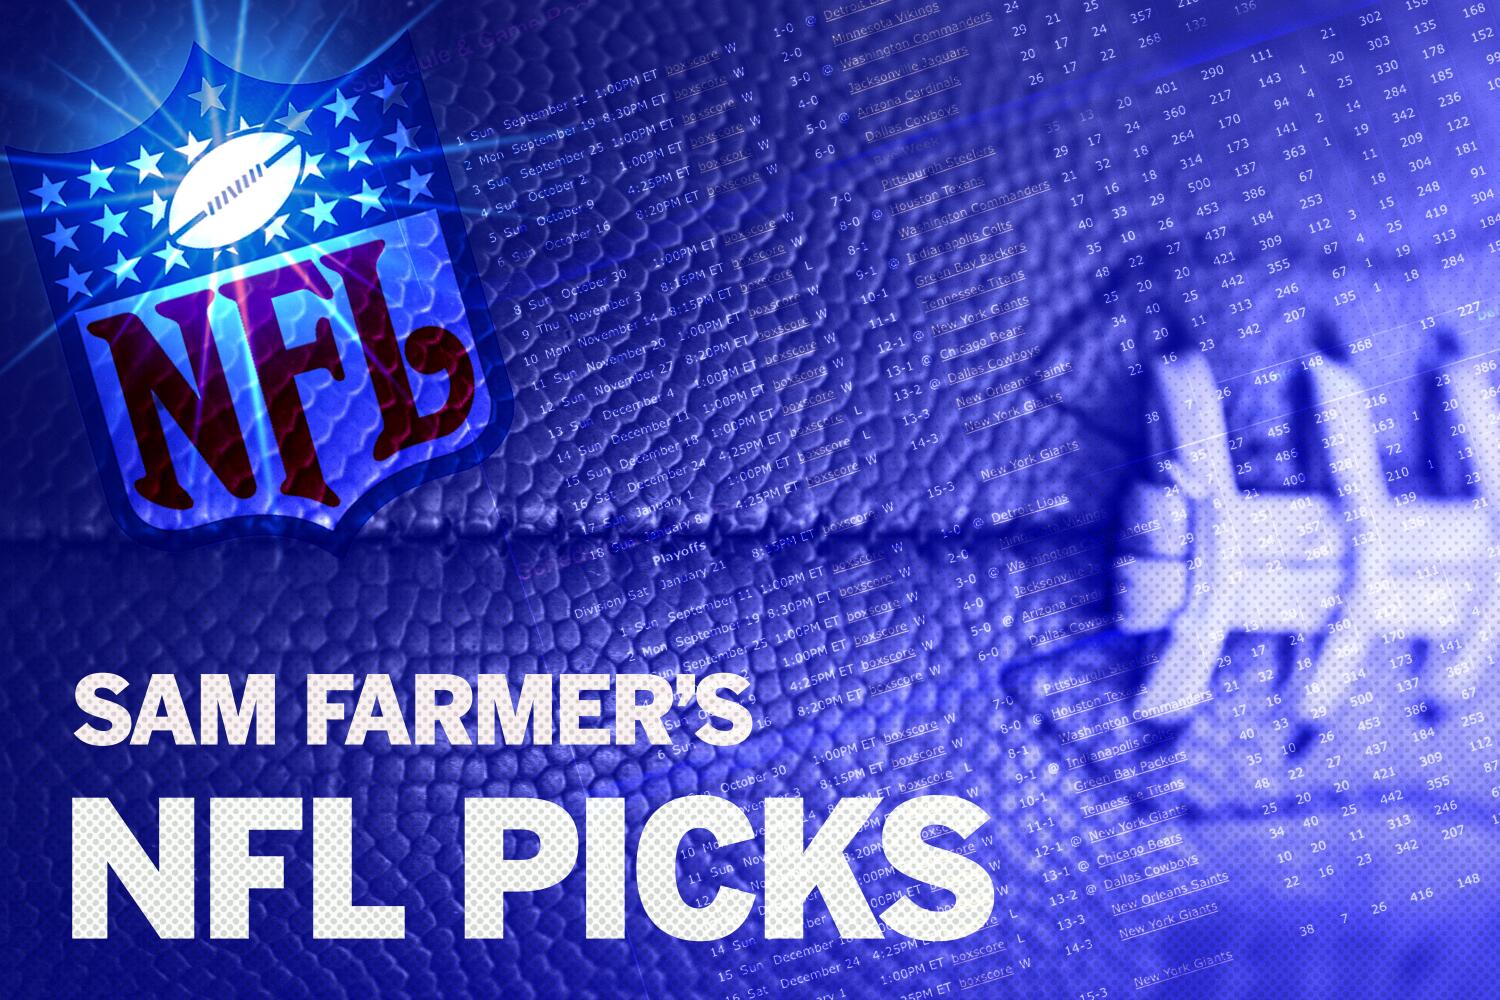 NFL Week 3 picks: Will Chargers or Patriots remain winless? Can Packers top Falcons?